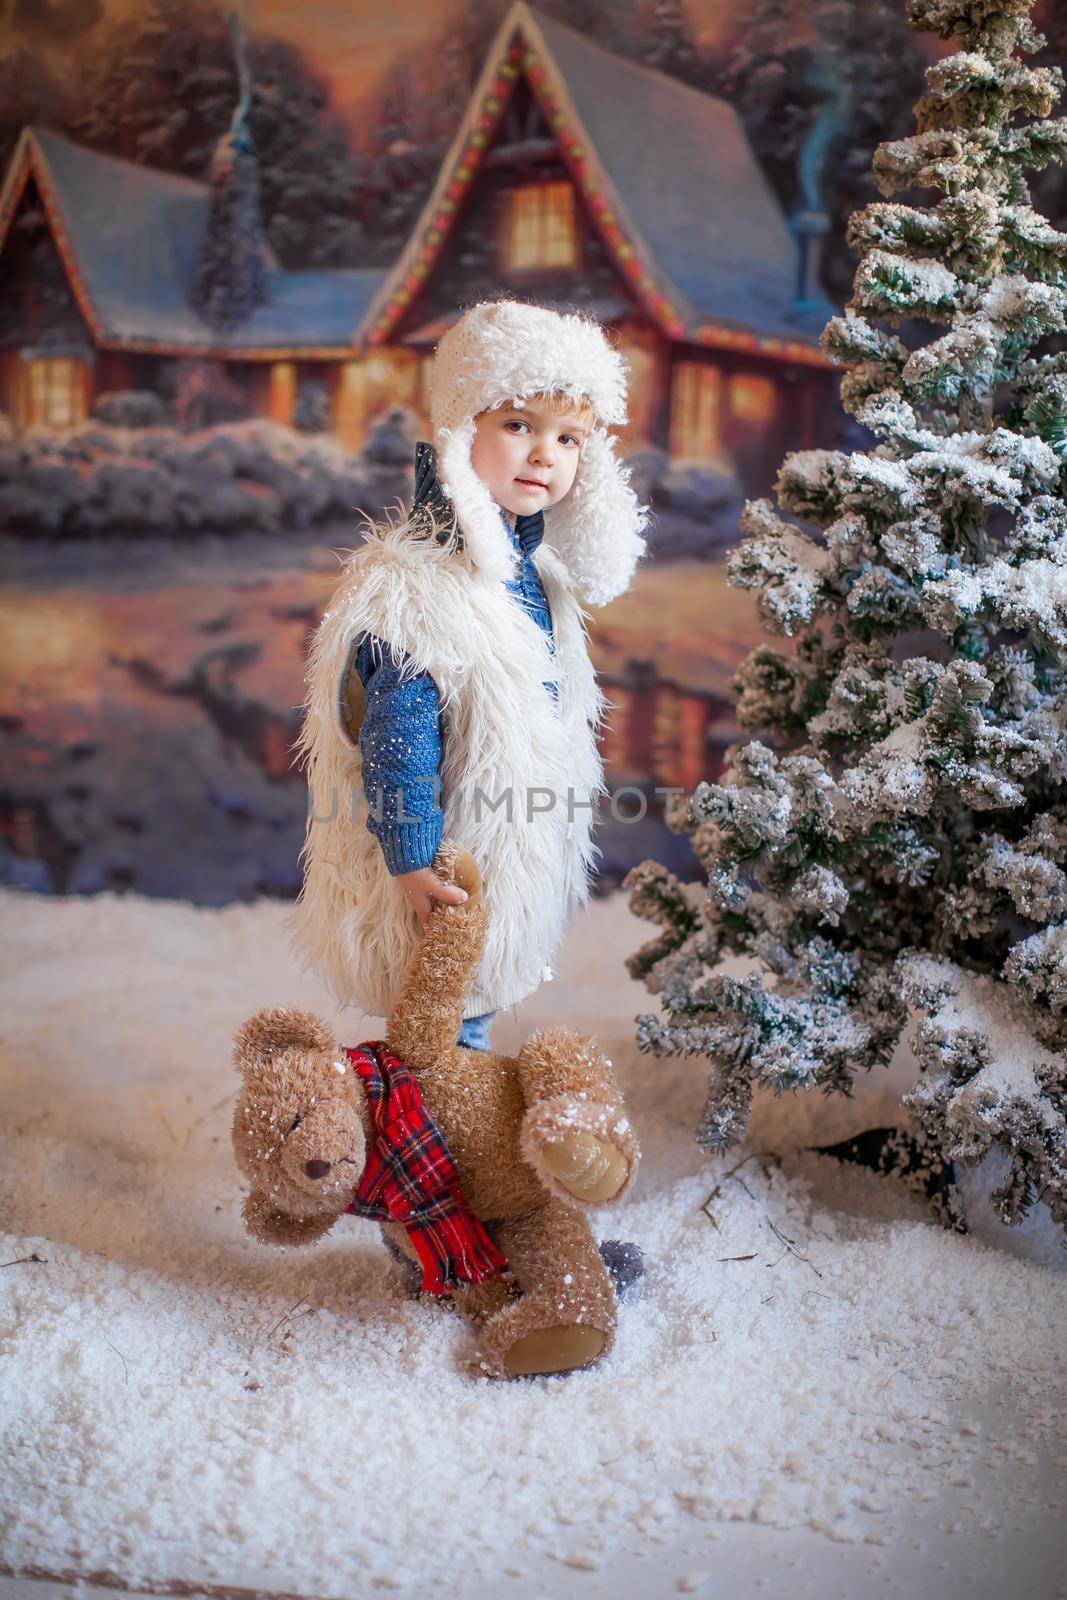 A boy in a white hat and boots on the background of an artificial forest in the winter village